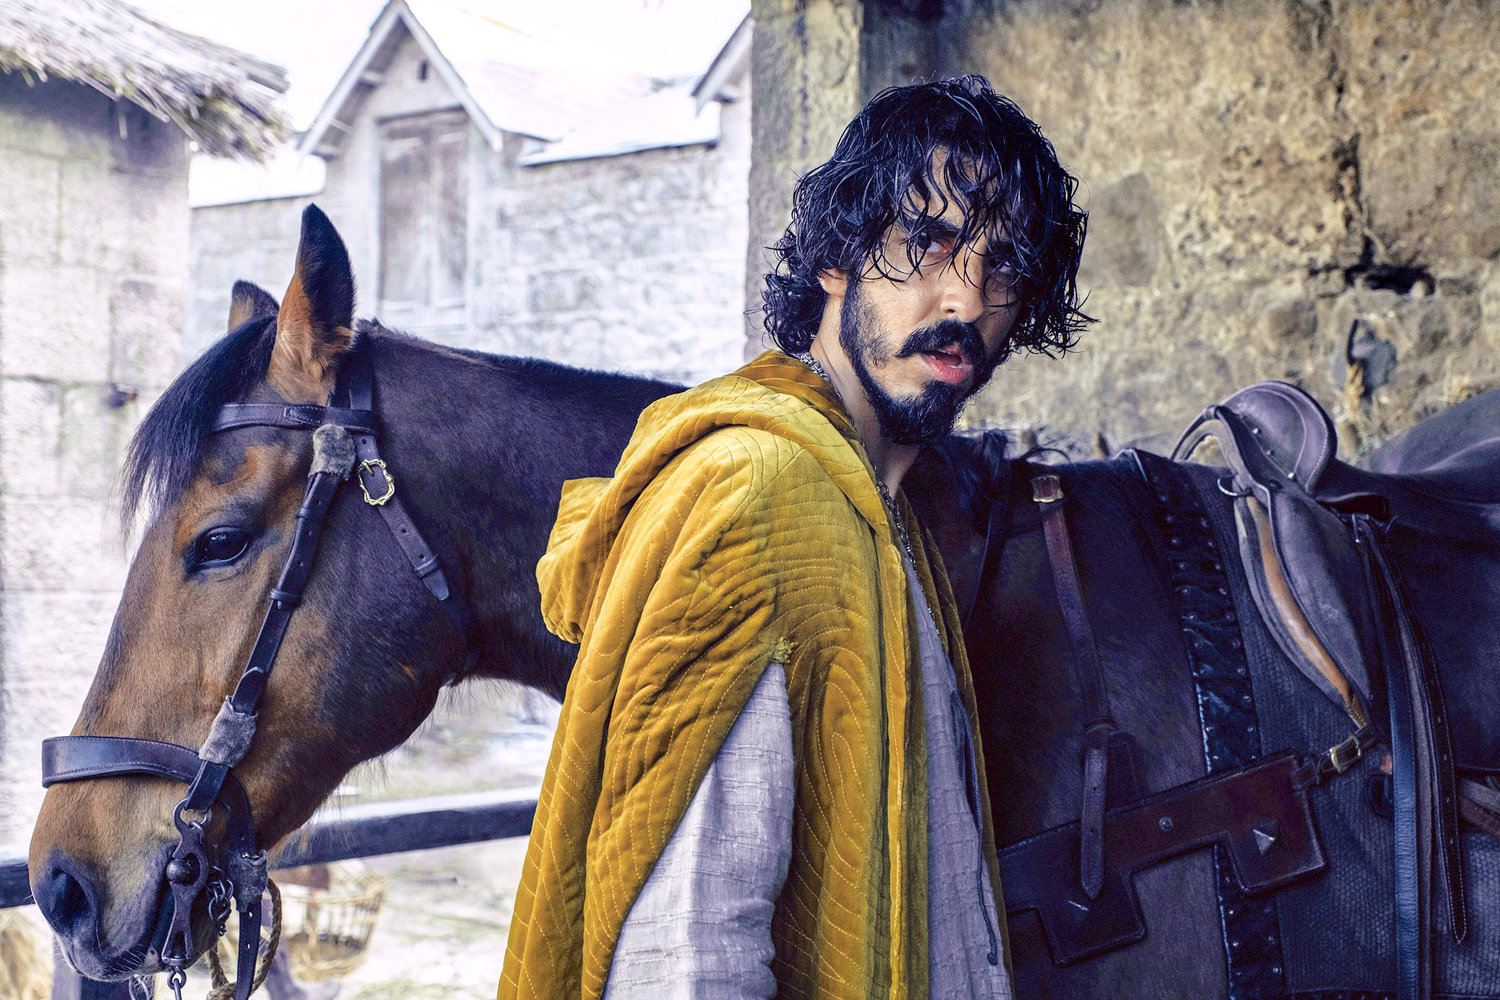 Arthouse film — Dev Patel in a scene from "The Green Knight."